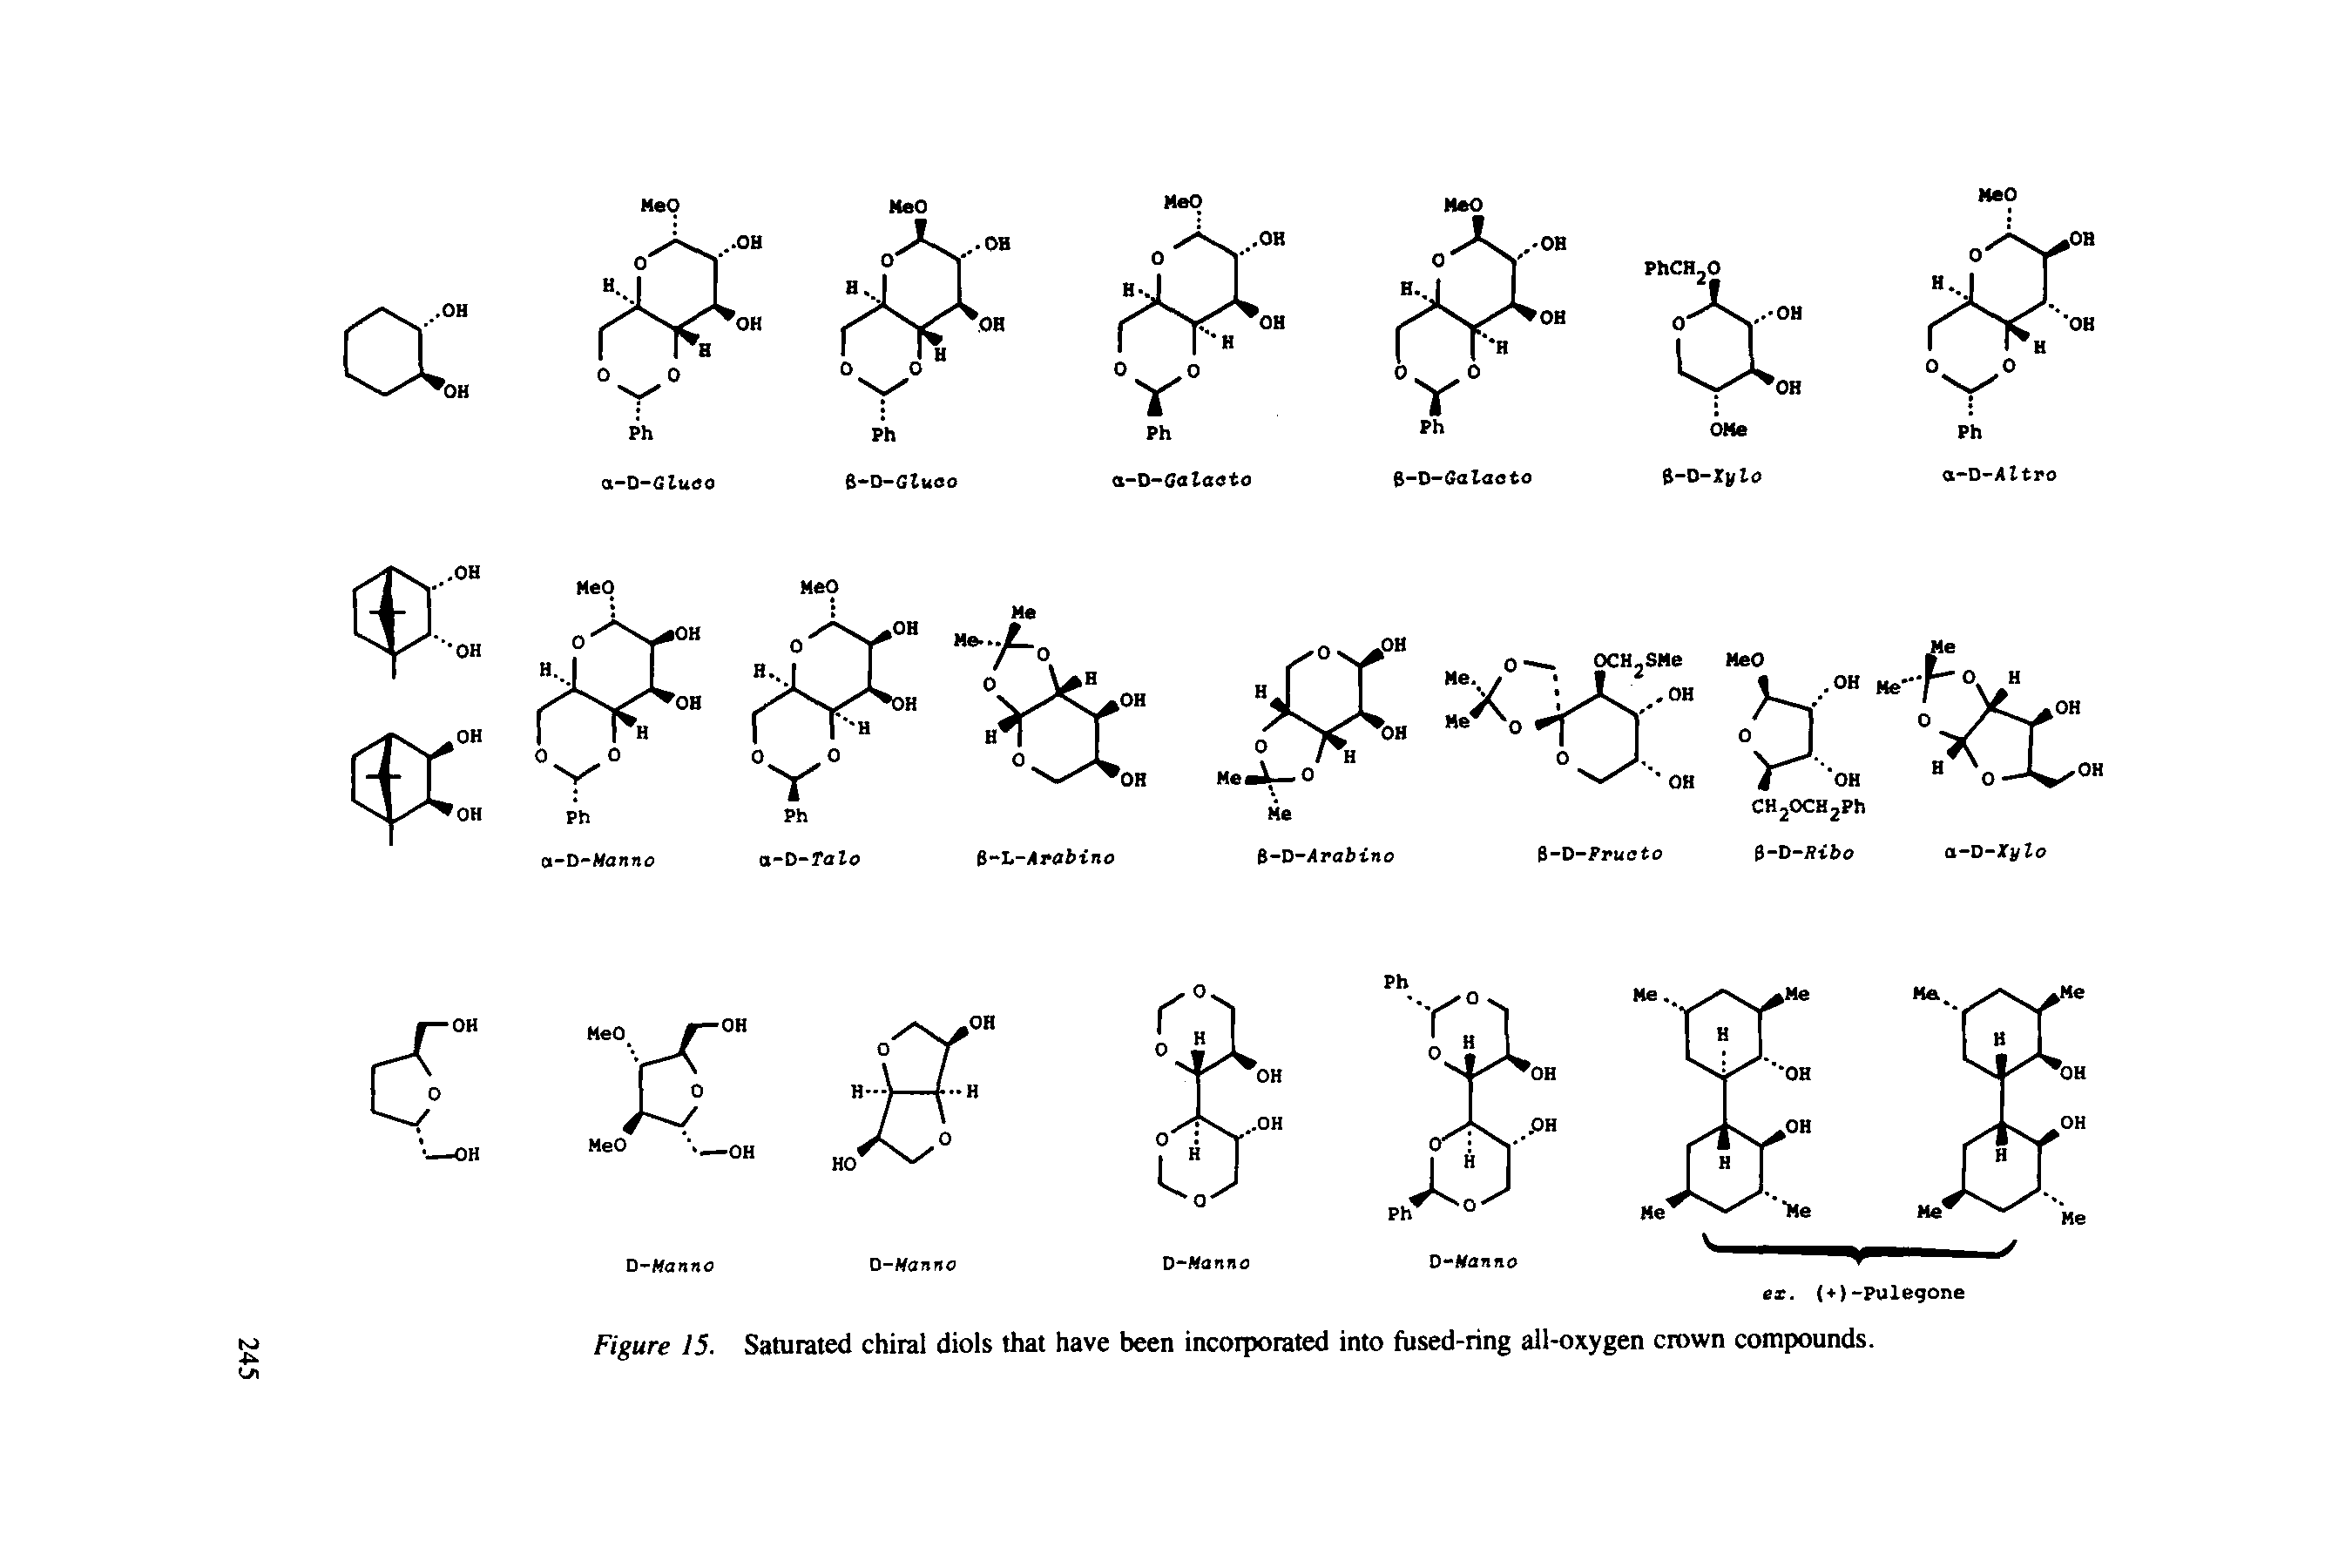 Figure 15. Saturated chiral diols that have been incorporated into fused-ring ail-oxygen crown compounds.